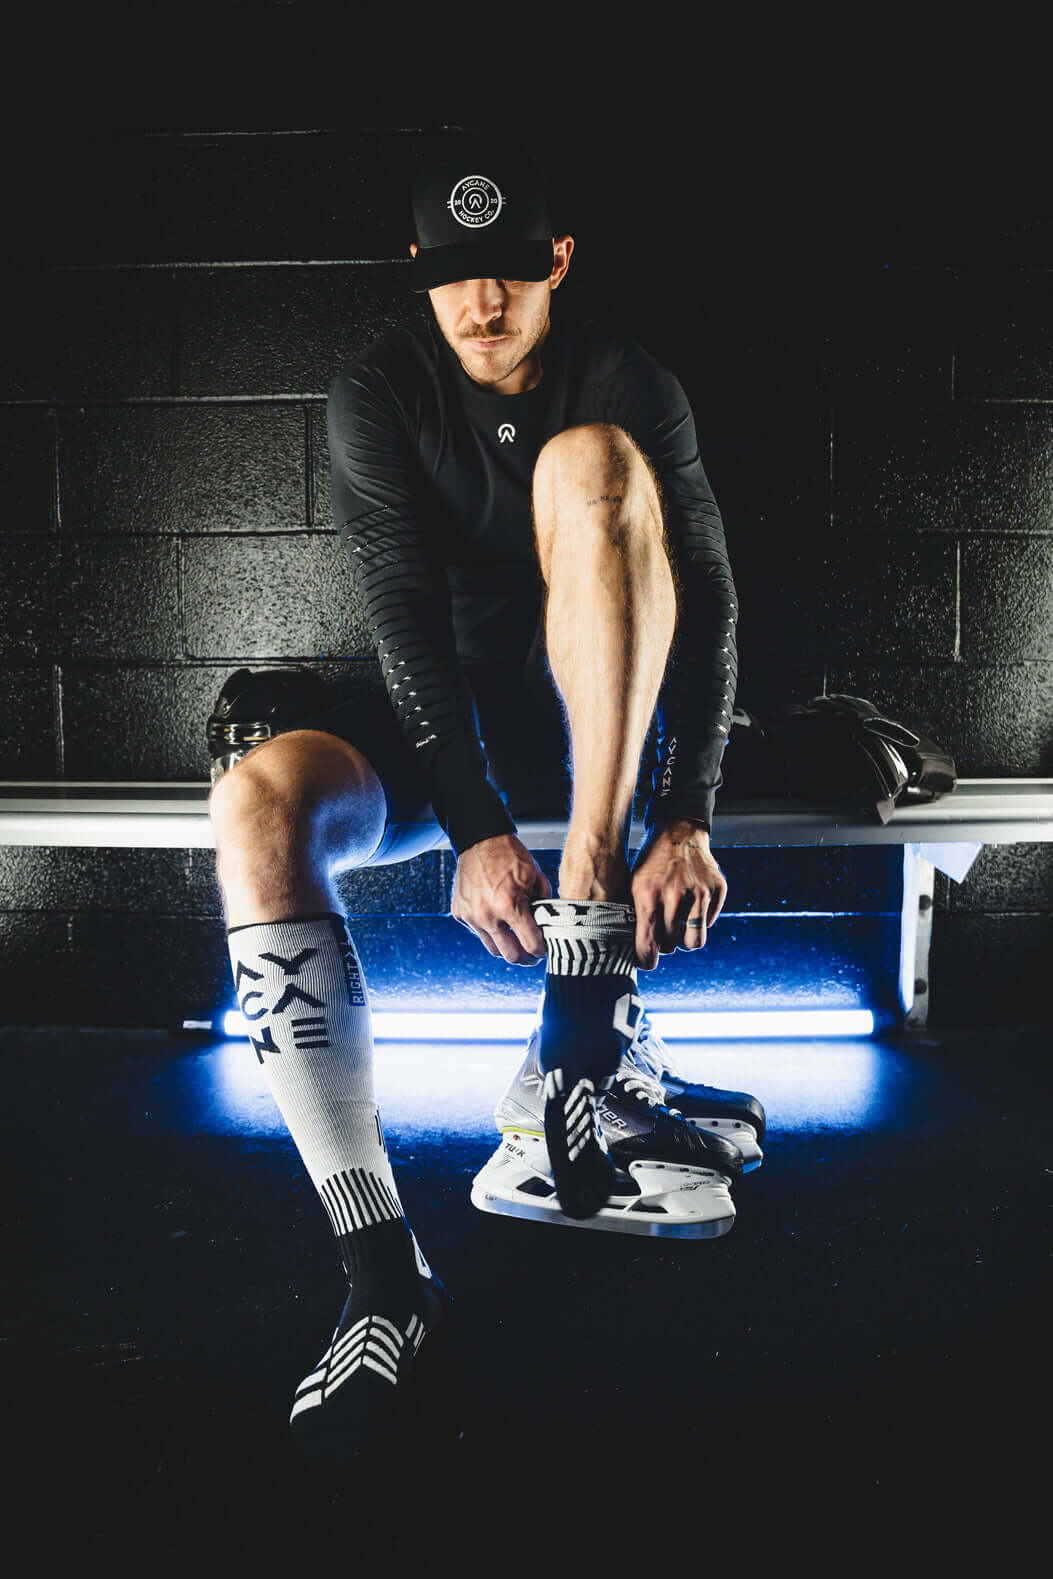 Hockey equipment & workout gear for youth